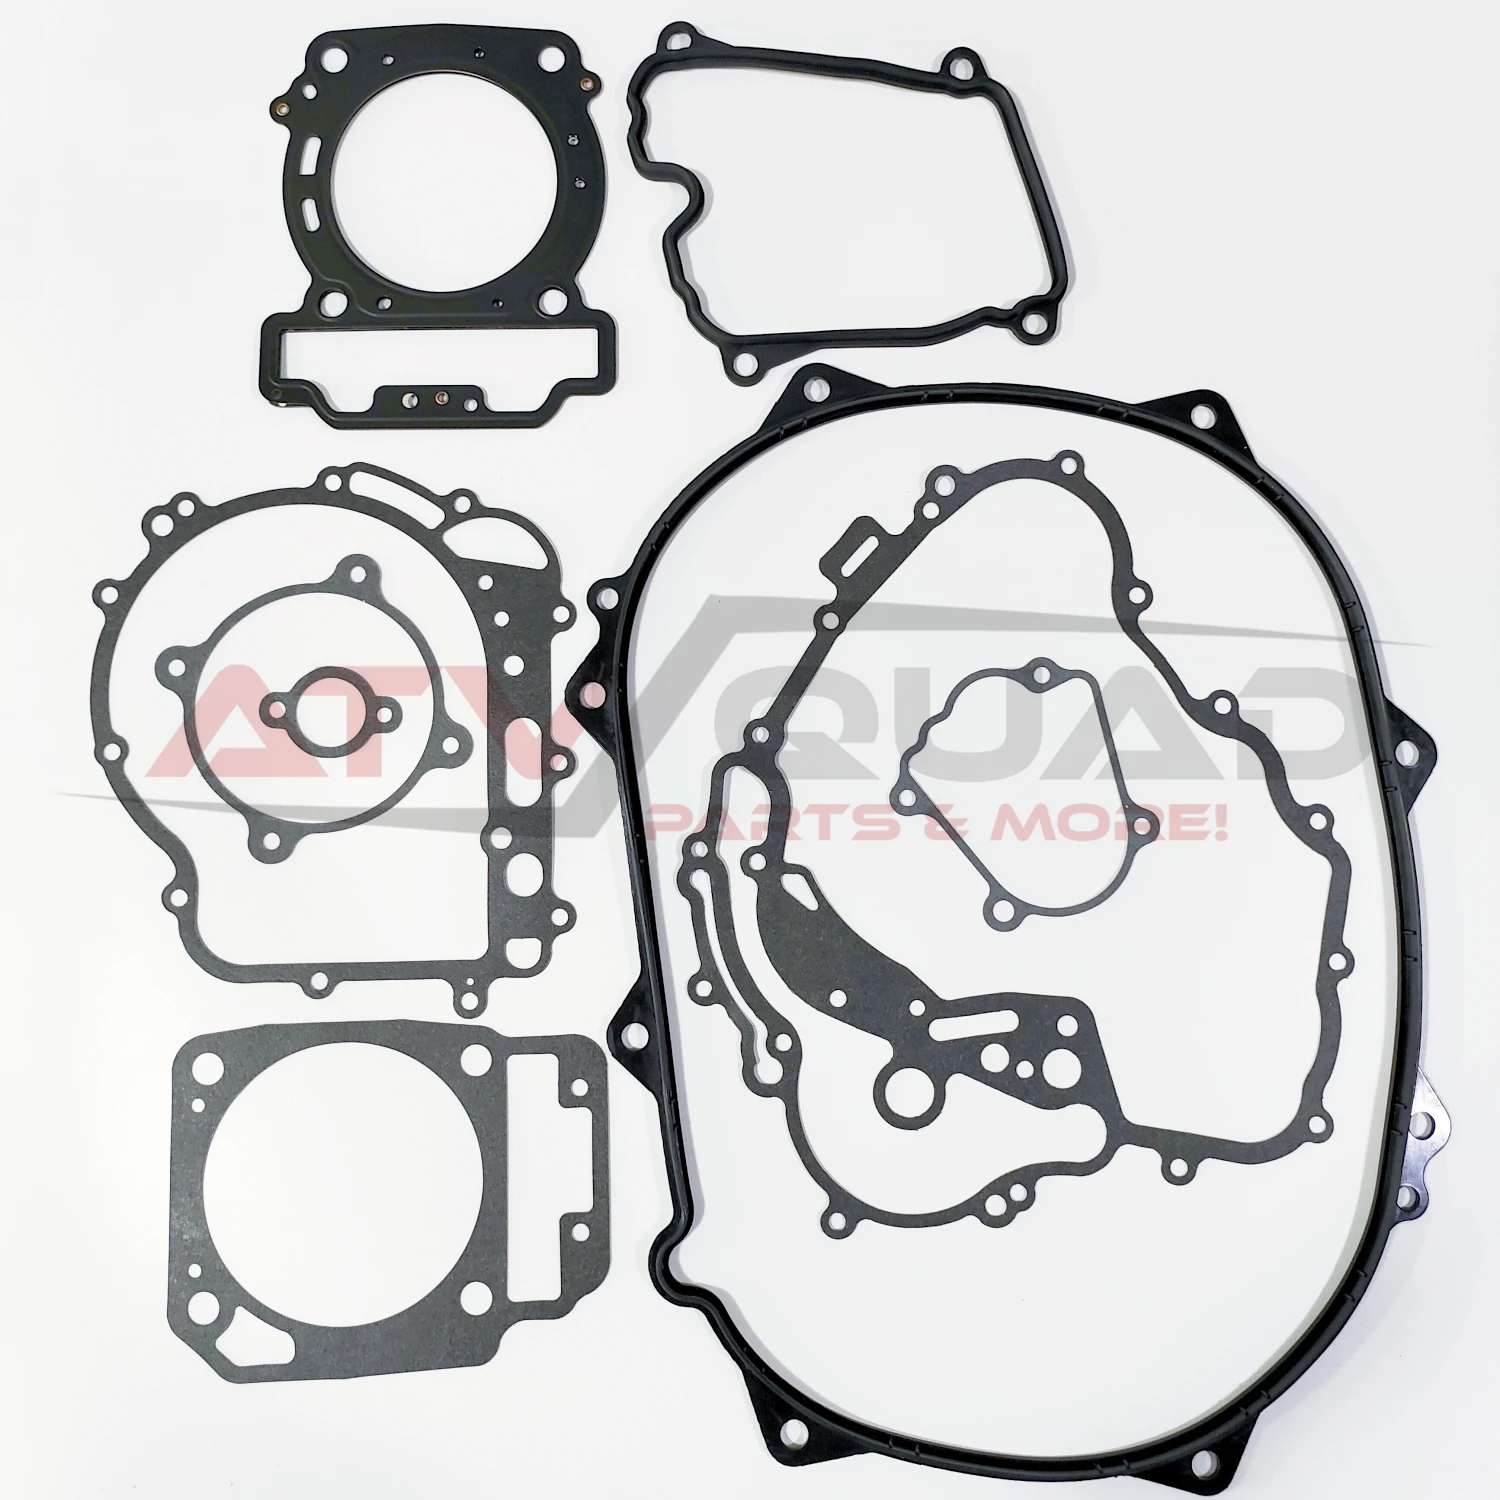 Engine Gasket Kit for CFmoto 400 450 191Q 500S 520 191R 550 Z550 600 Touring 625 U6 191S 2020-2023 0GS0-0000A0